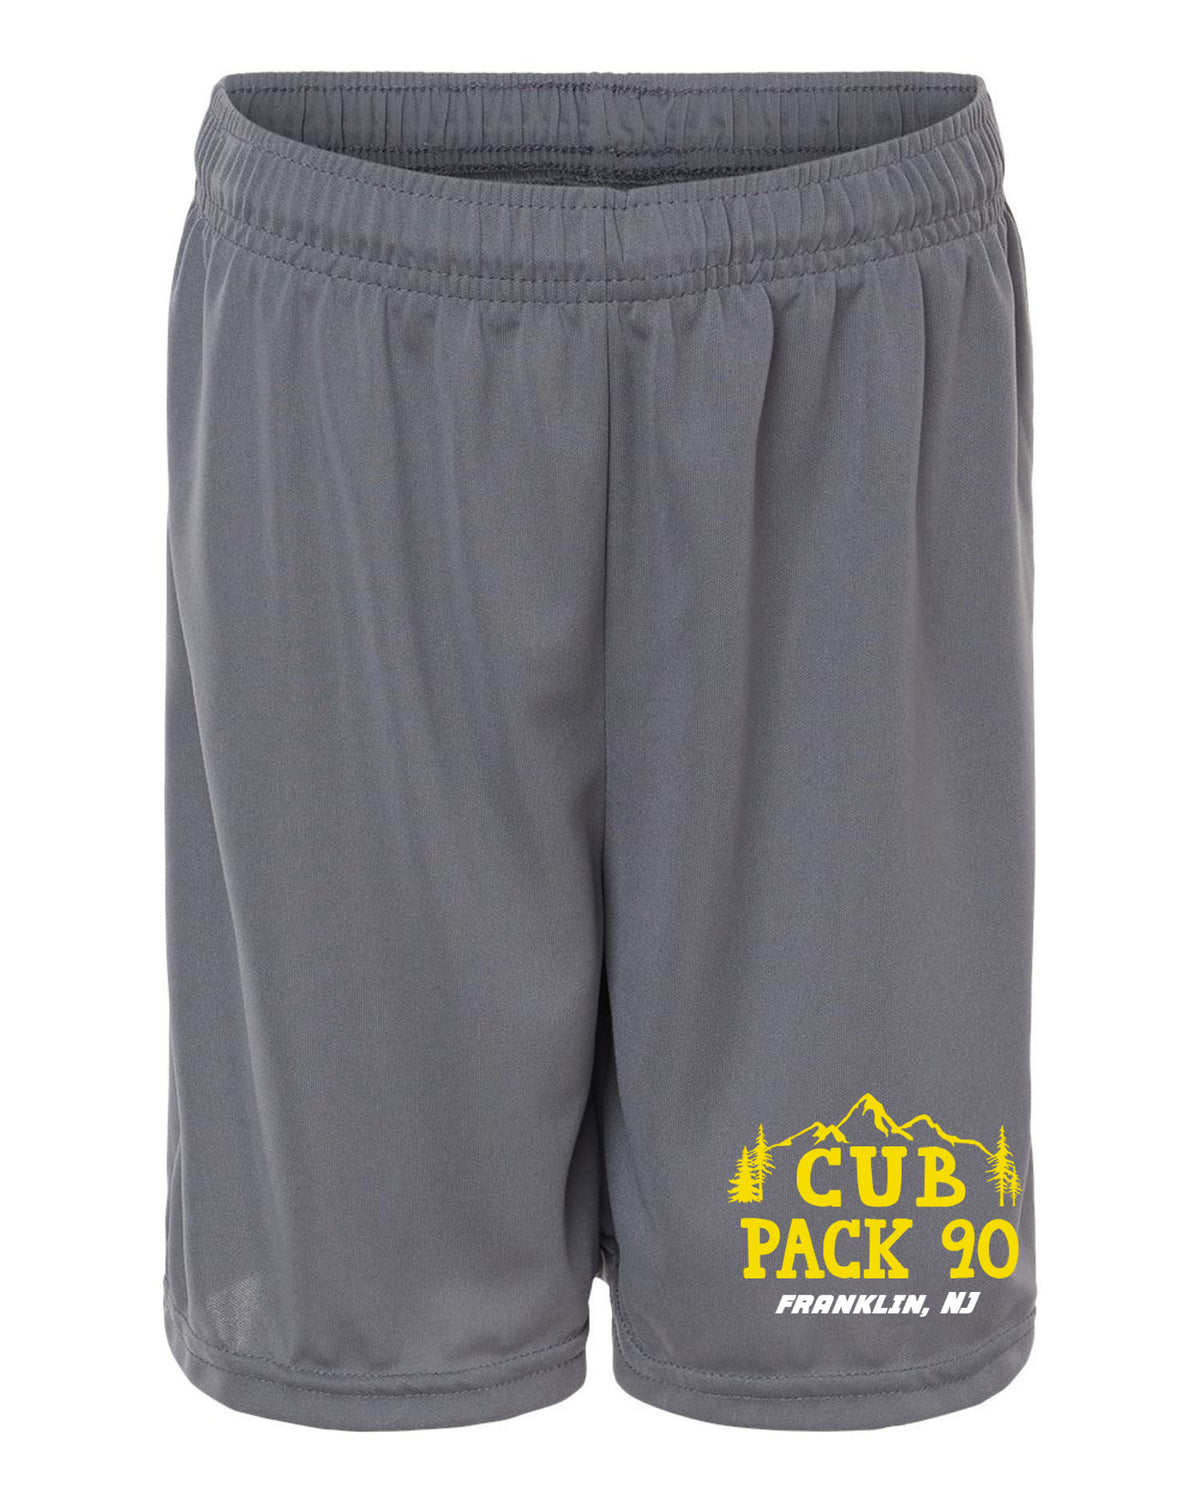 Cub Scout Pack 90 Performance Shorts Design 1